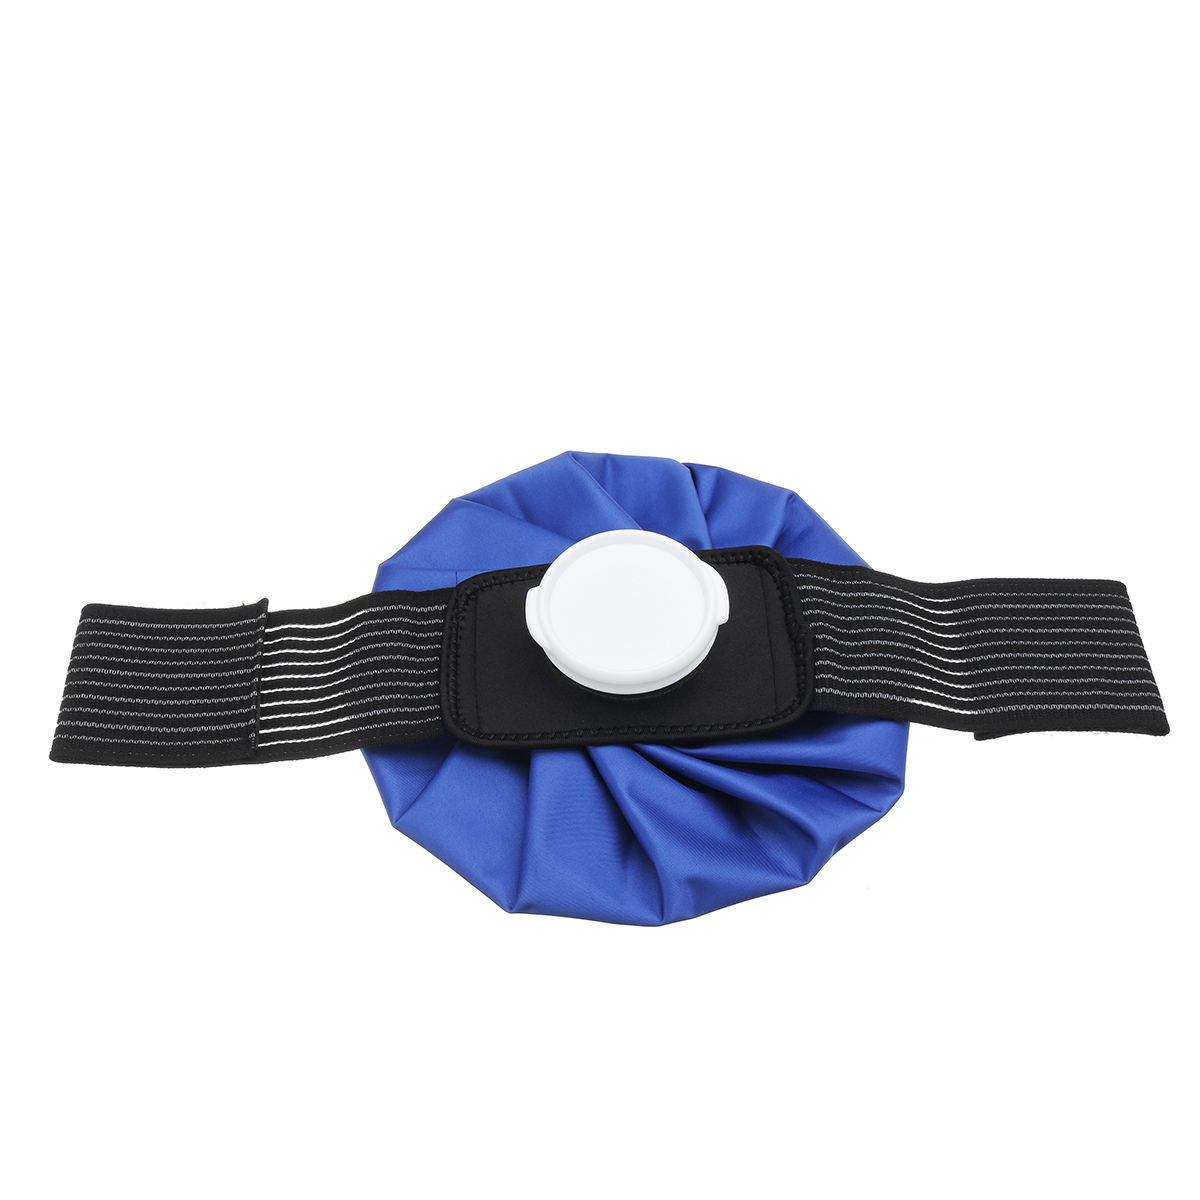 Ice-Bag-Pack-Pain-Relief-Cold-Broad-Knee-Shoulder-Injuries-Therapy-Strap-Wrap-Elastic-Tie-Belt-1551776-2